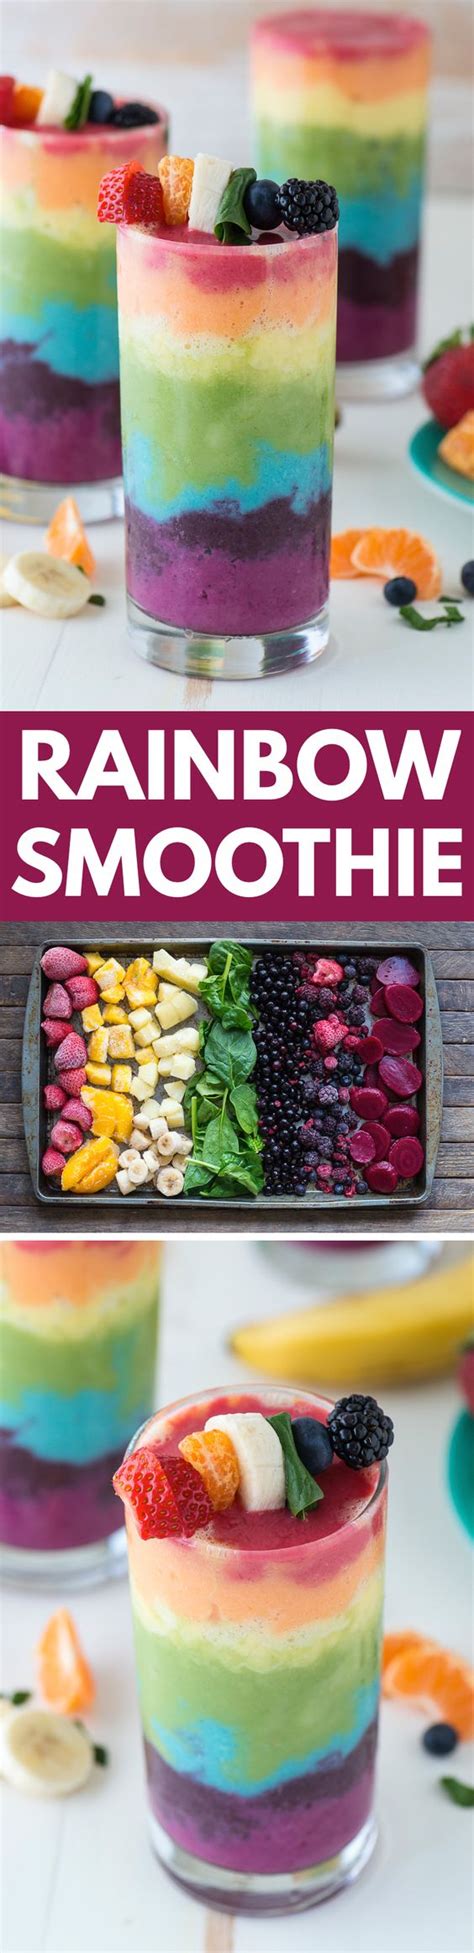 88 Tasty Smoothie Recipes To Start Your Day In A Delicious